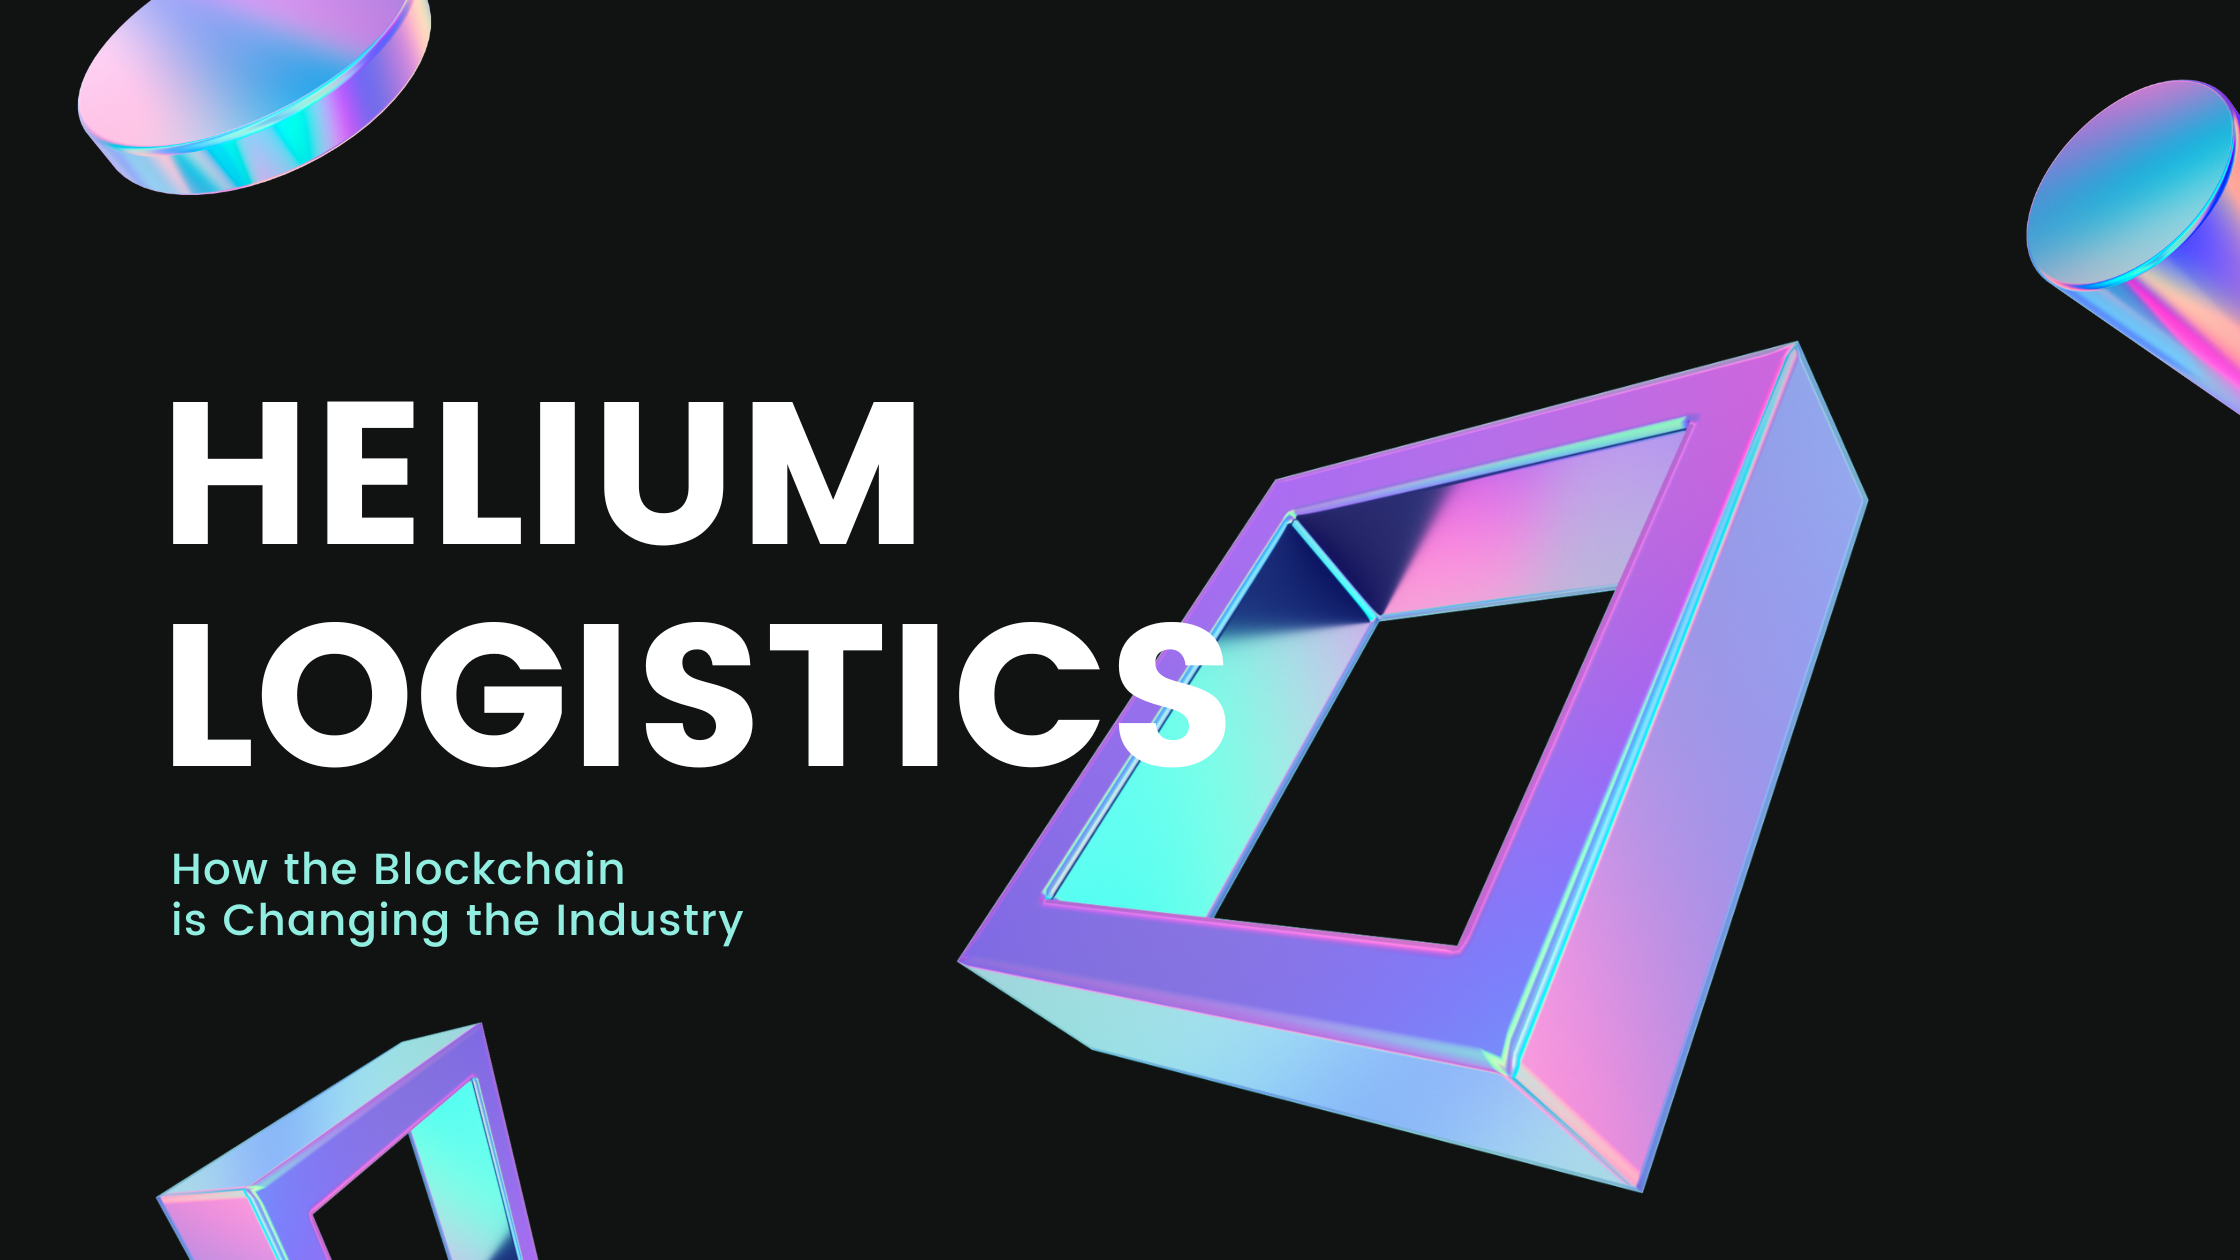 Helium Logistics: How the Blockchain is Changing the Industry